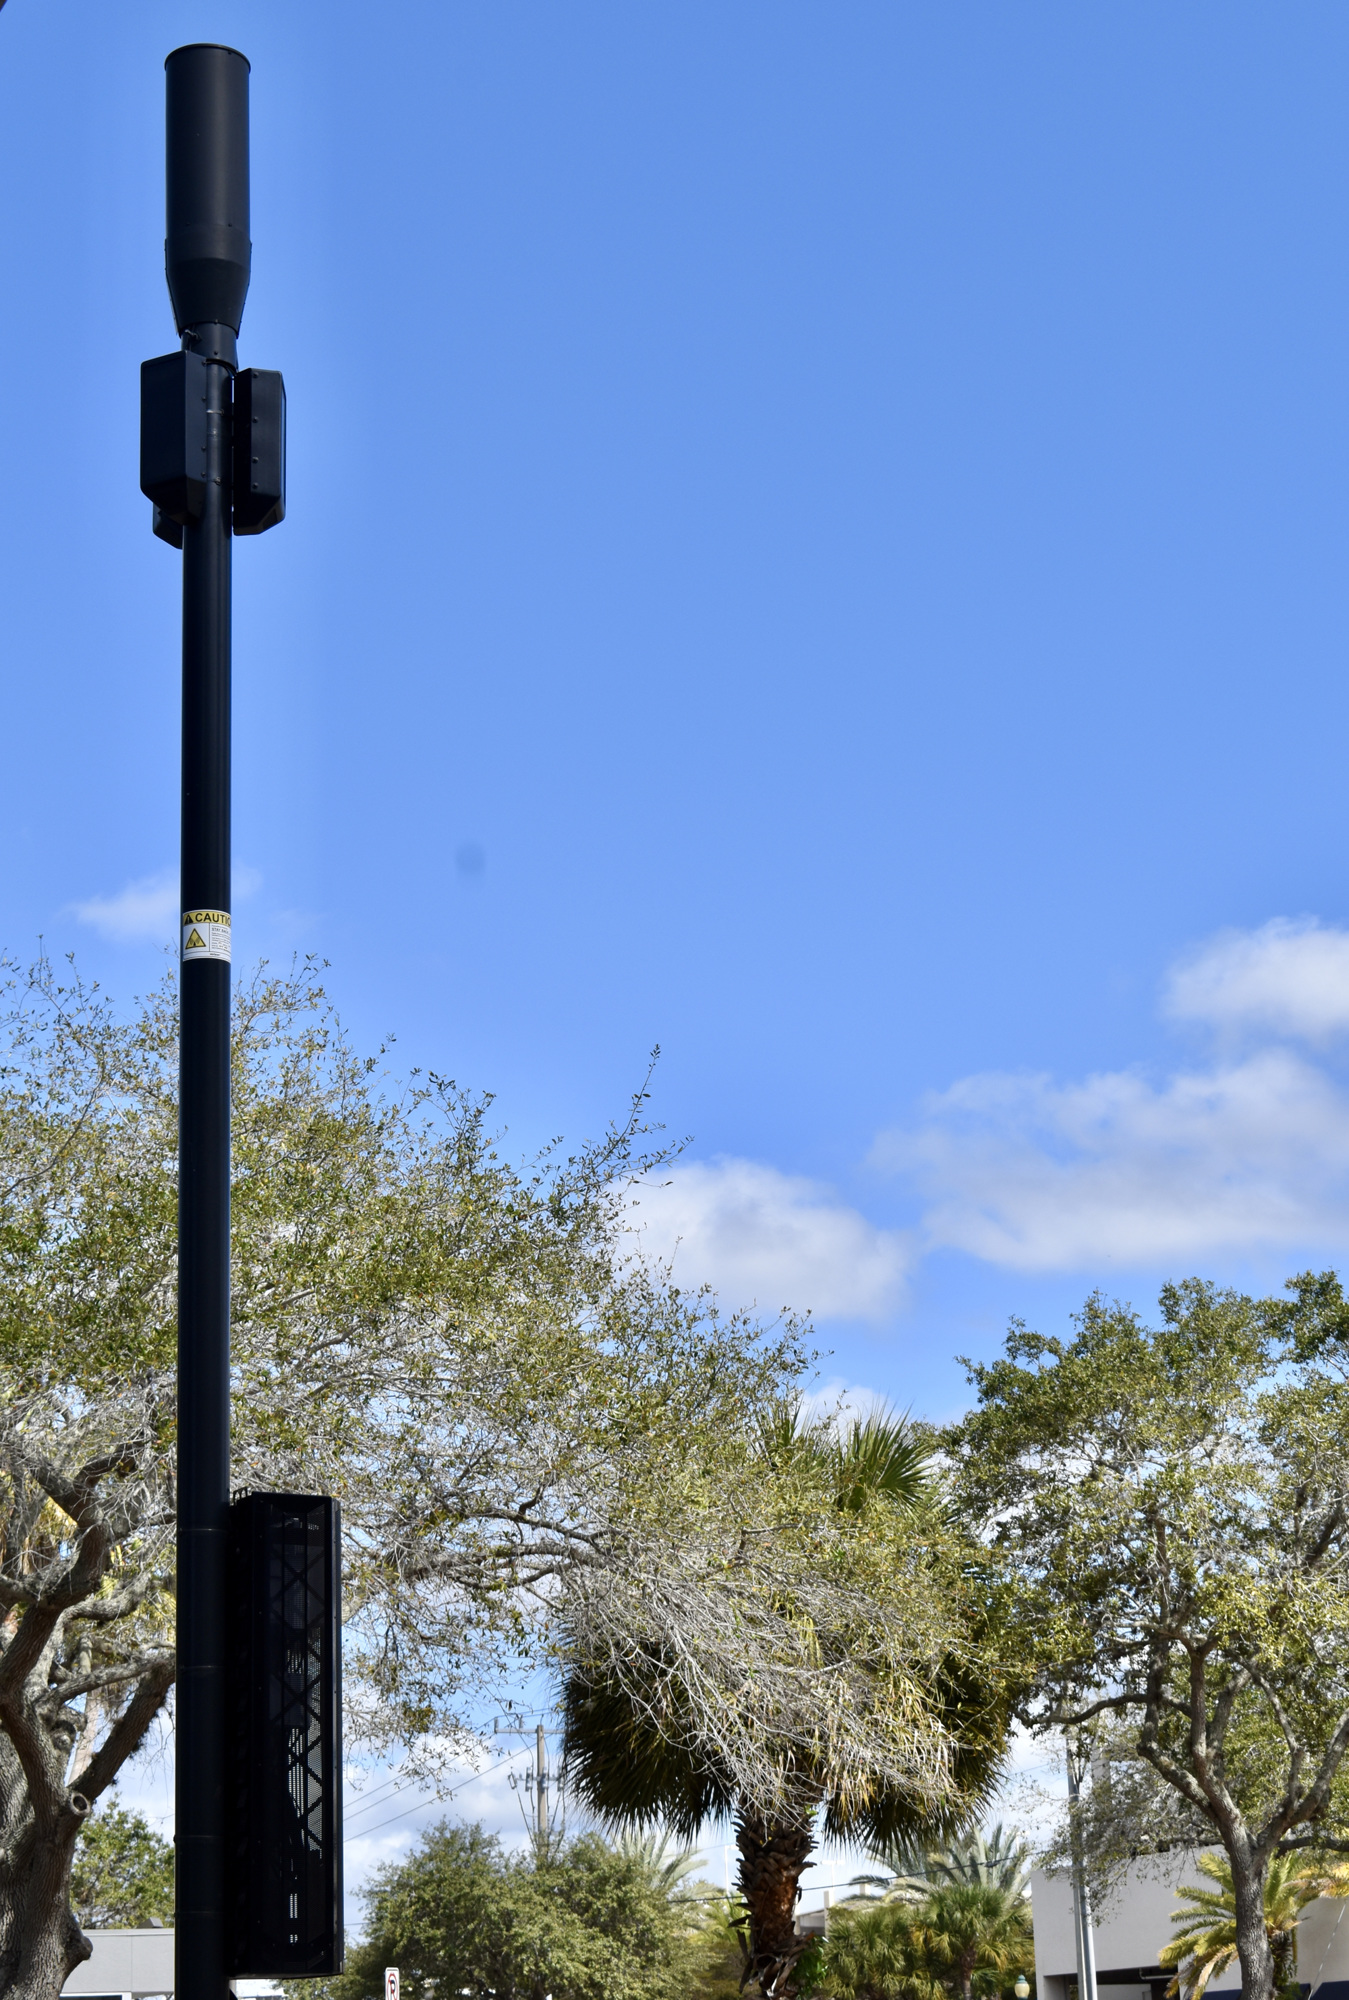 Small-cell poles began popping up around Sarasota in 2019. Verizon installed about 31 between 10th Street, Mound Avenue, U.S. 301 and the bayfront.